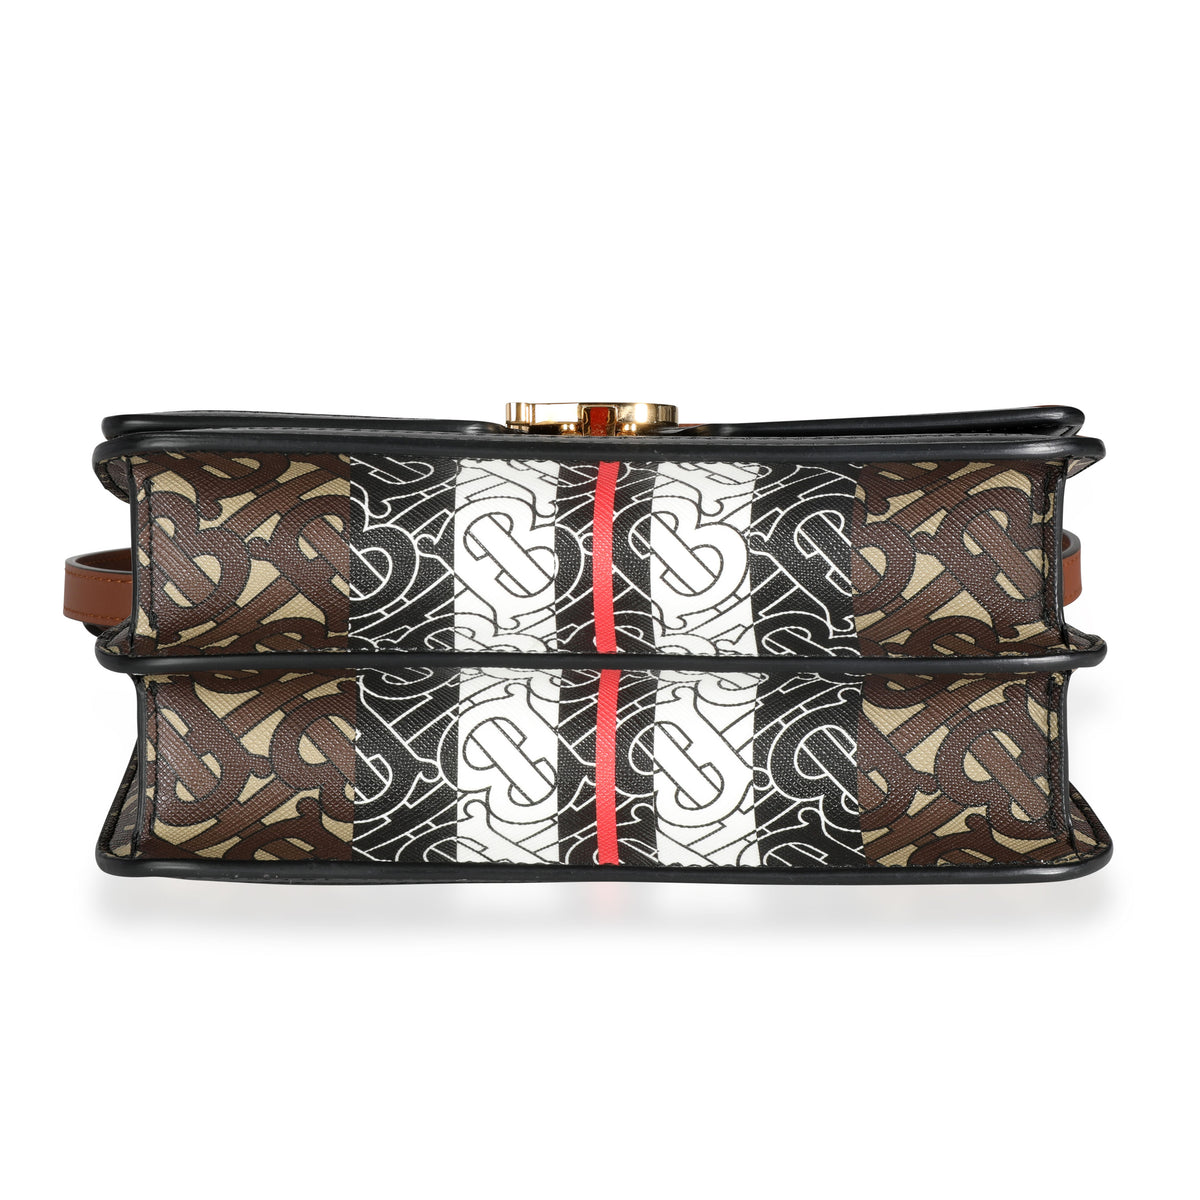 BURBERRY: belt in canvas and leather with monogram print - Brown